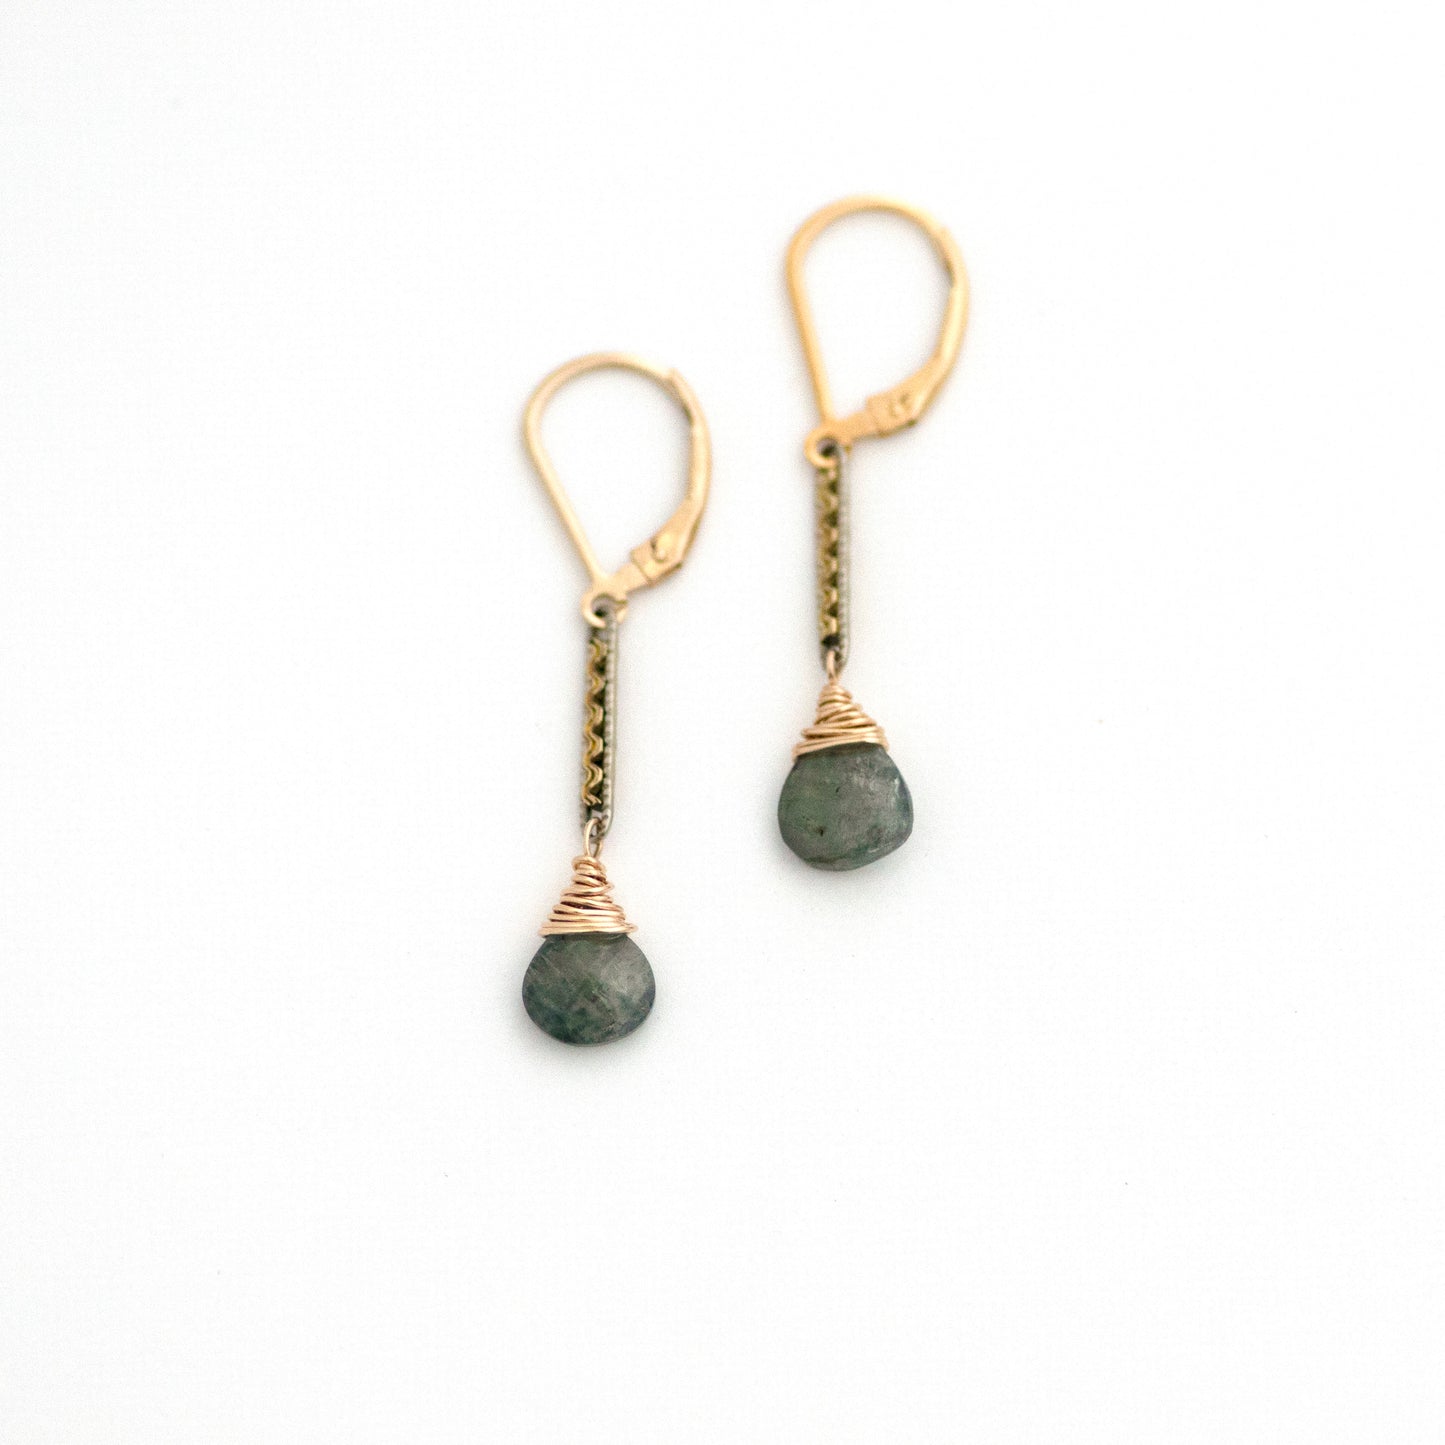 These one-of-a-kind conversion earrings are made up of:  Gold filled and silver tone Edwardian watch chain links from the early 1900s with hand tooled details. Moss aquamarine.